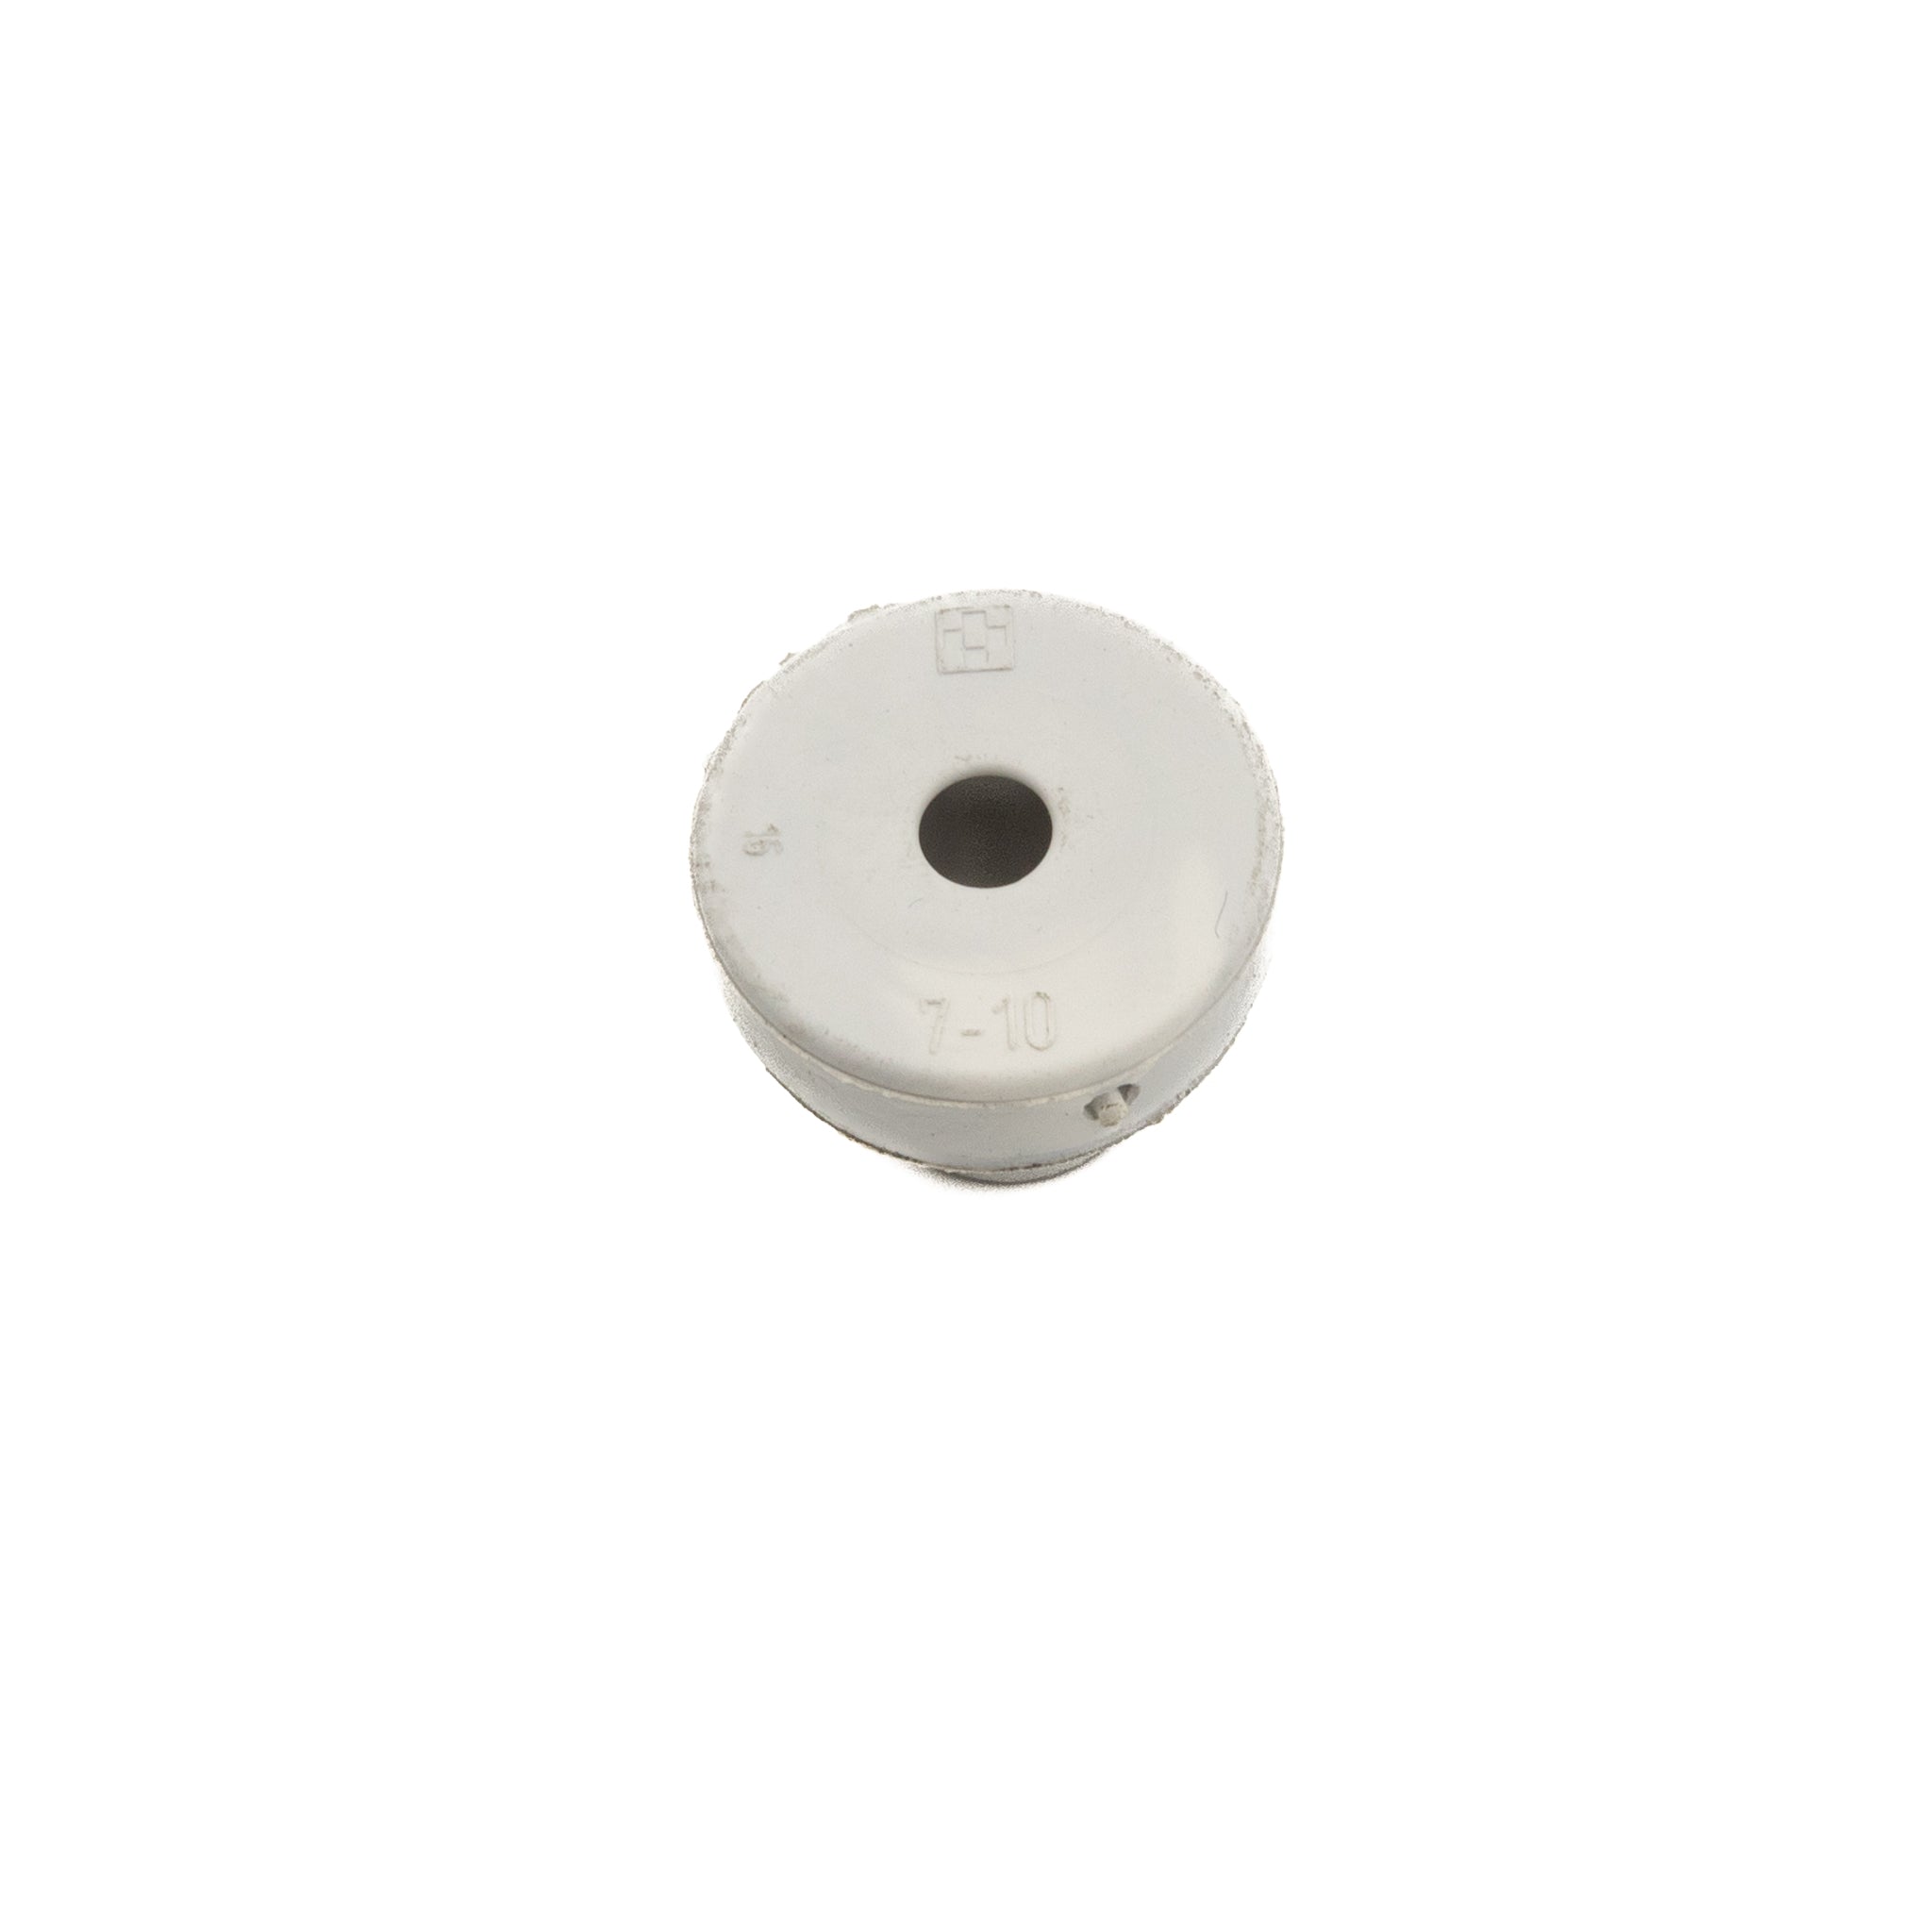 Boxco BC-RG-PG9 Rubber grommet, Applicable 16 mm hole